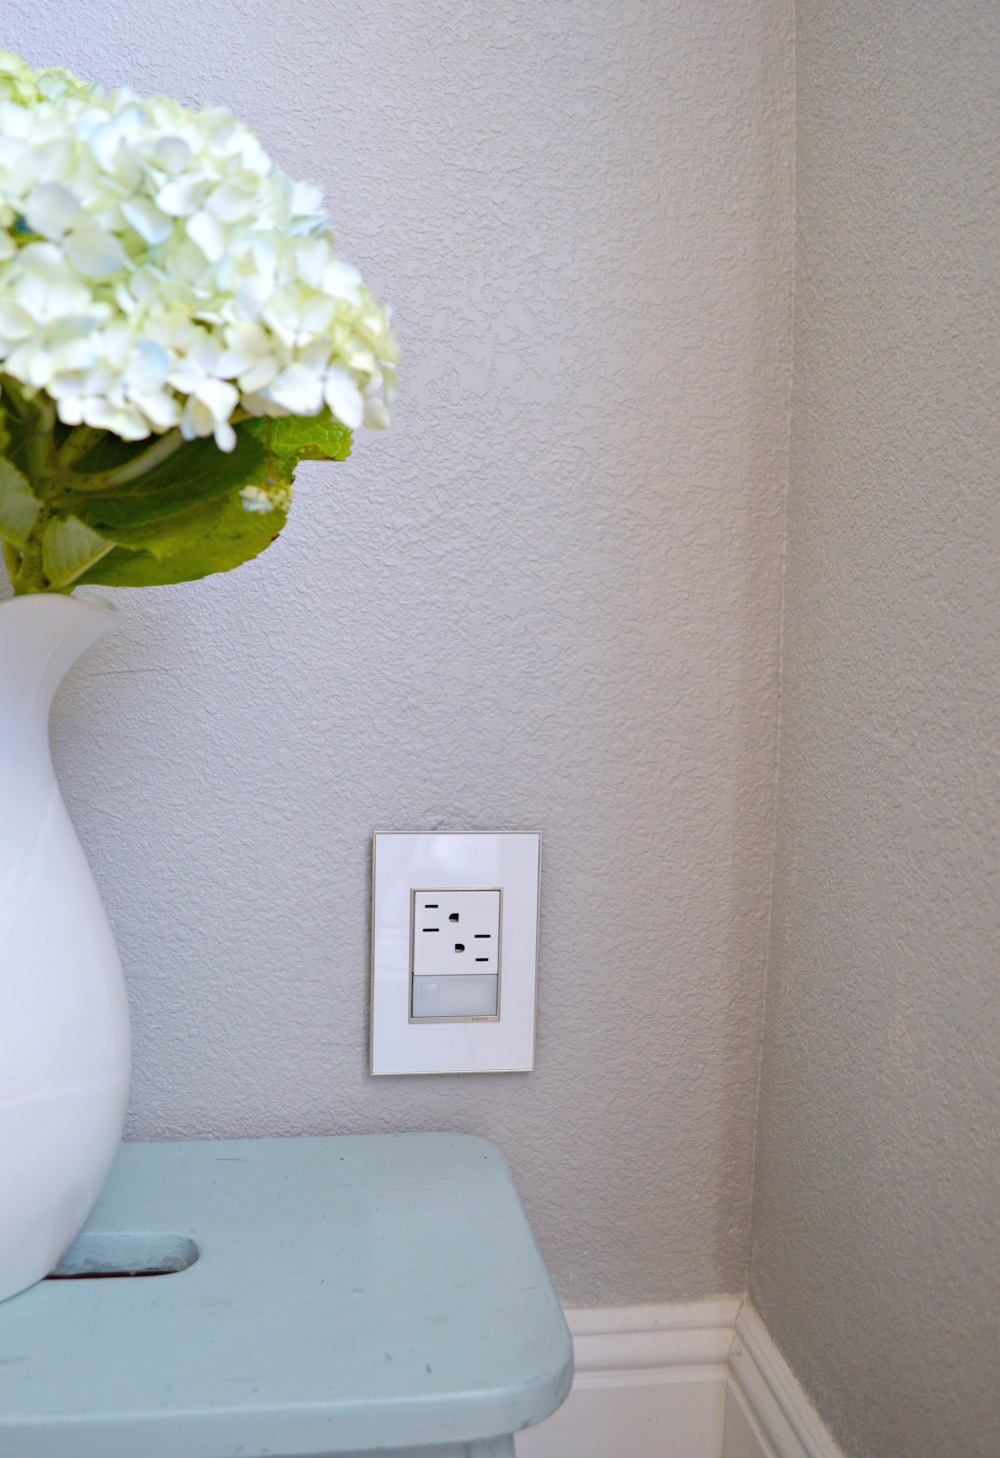 i-love-this-idea-a-night-light-built-into-the-outlet